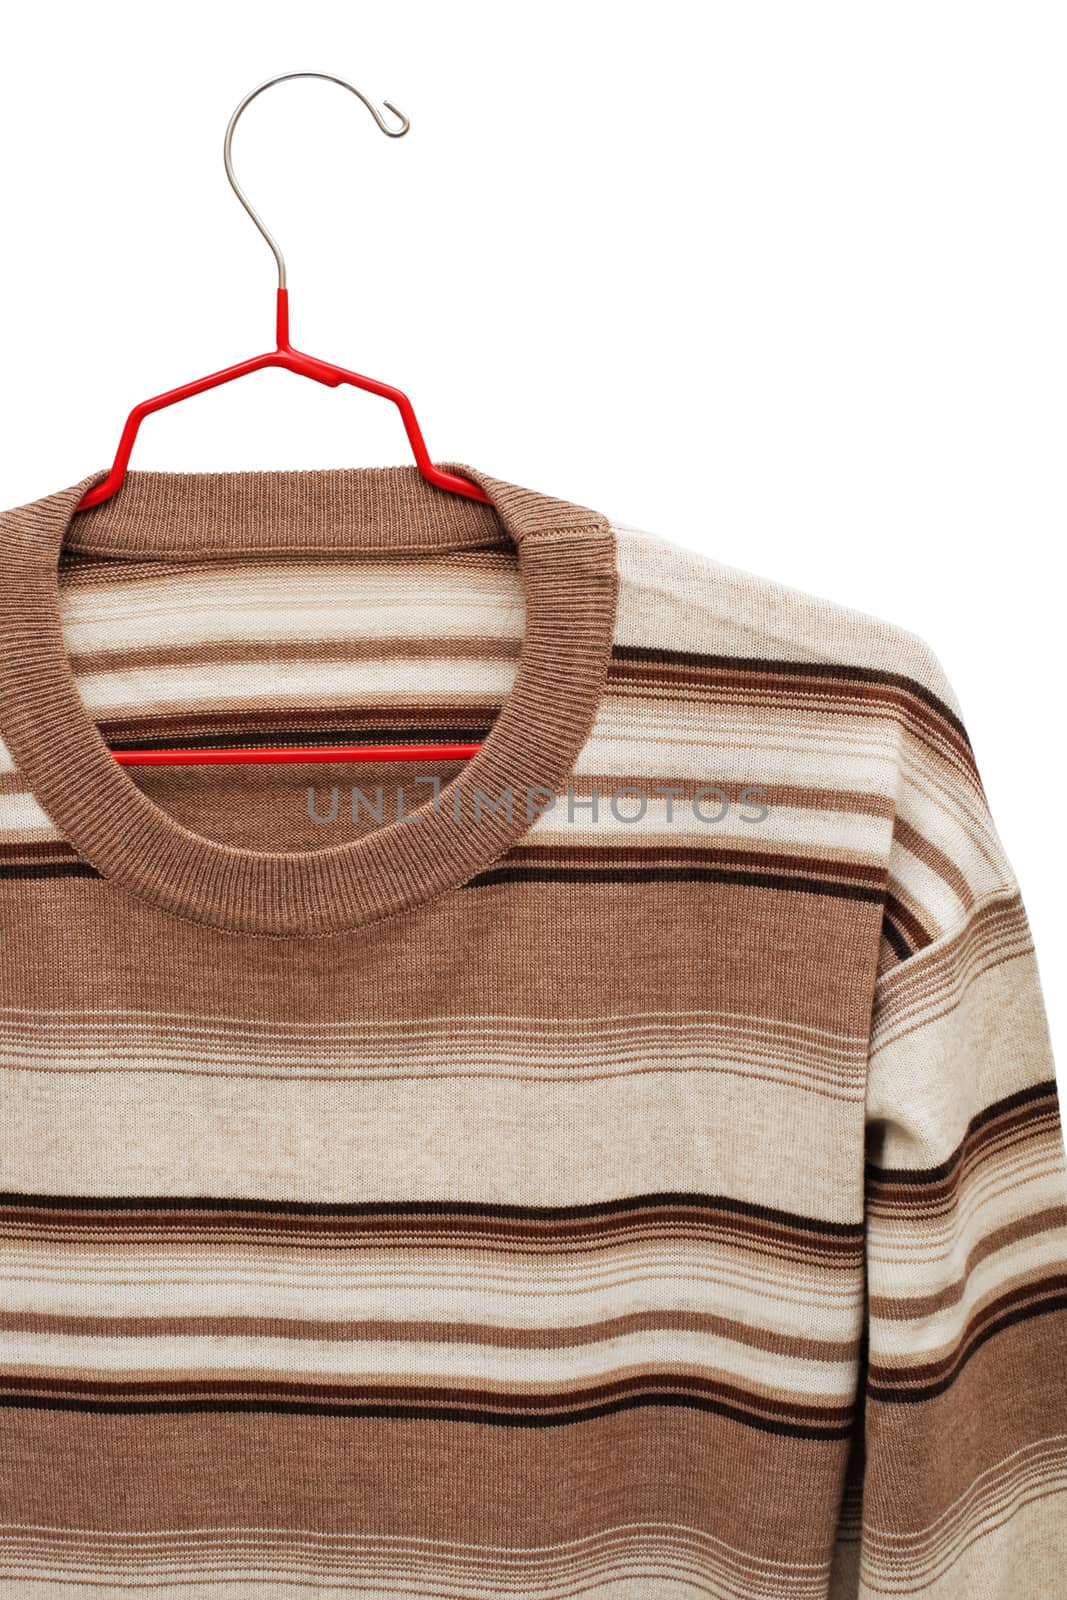 sweater by terex